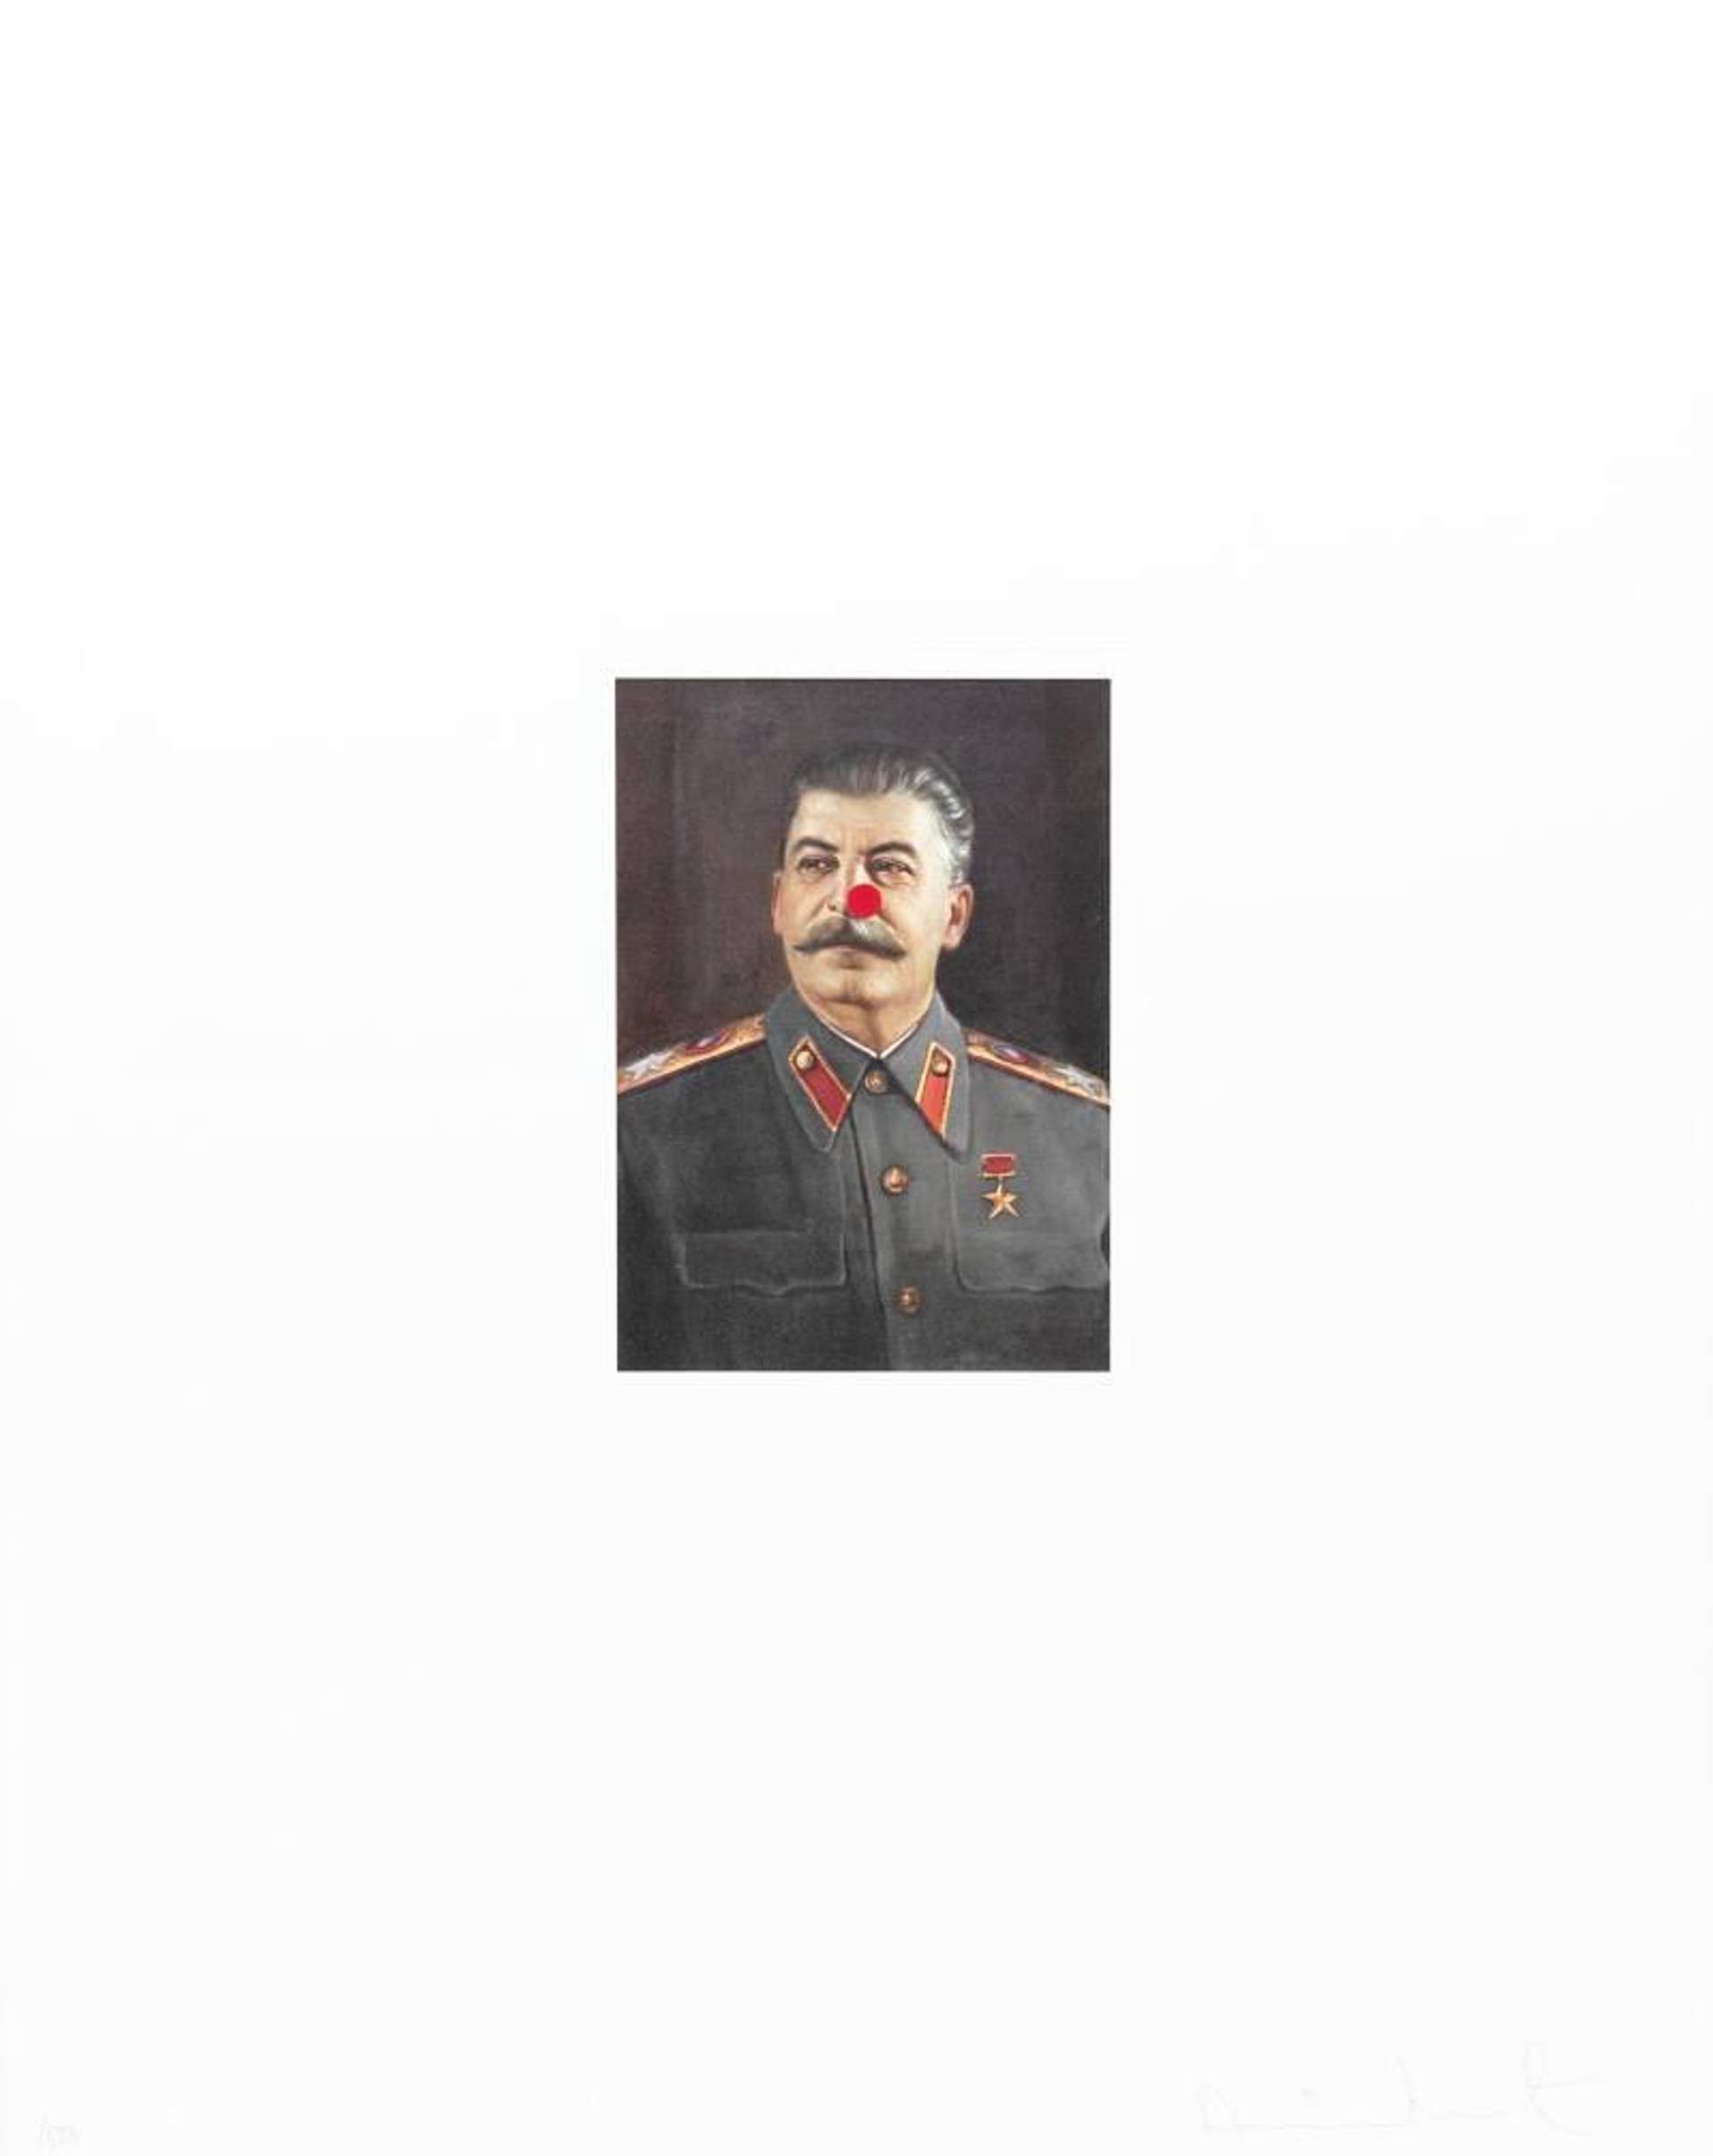 Damien Hirst: Stalin (Comic Relief) - Signed Print